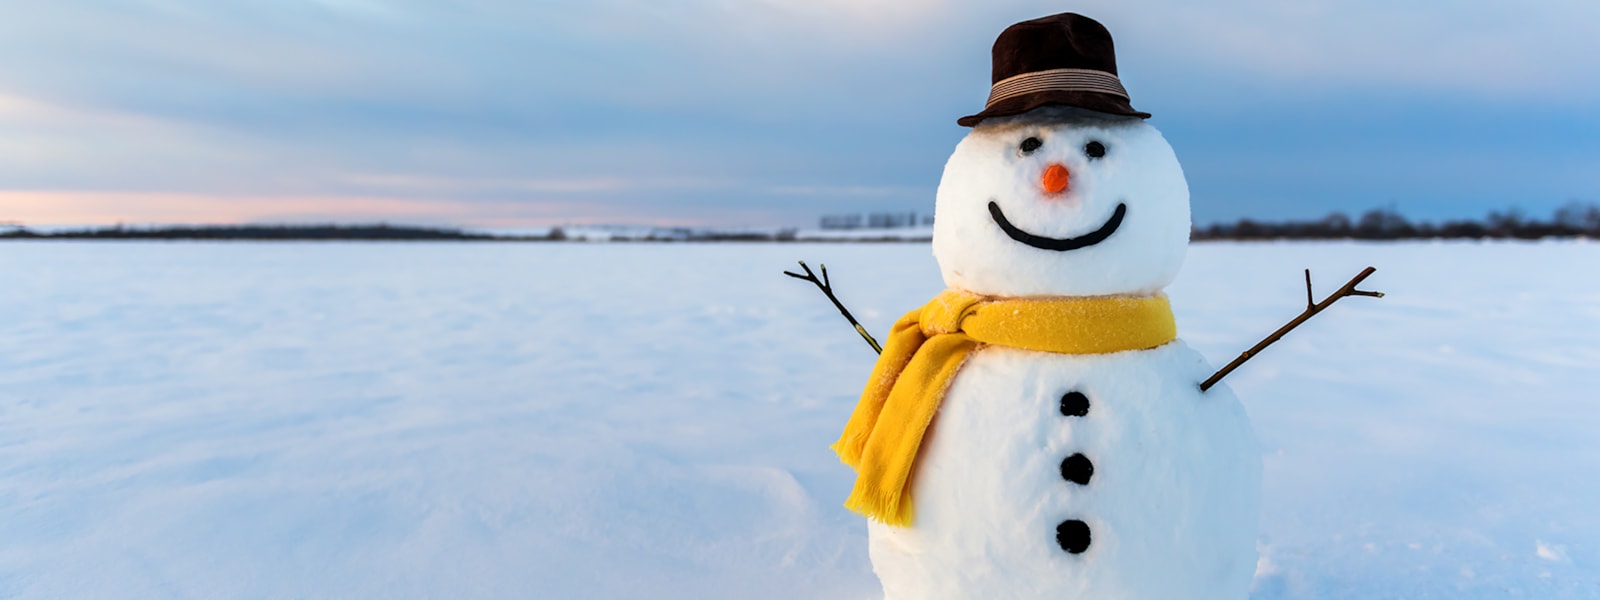 snowman with black hat and yellow scarf in a snowy field